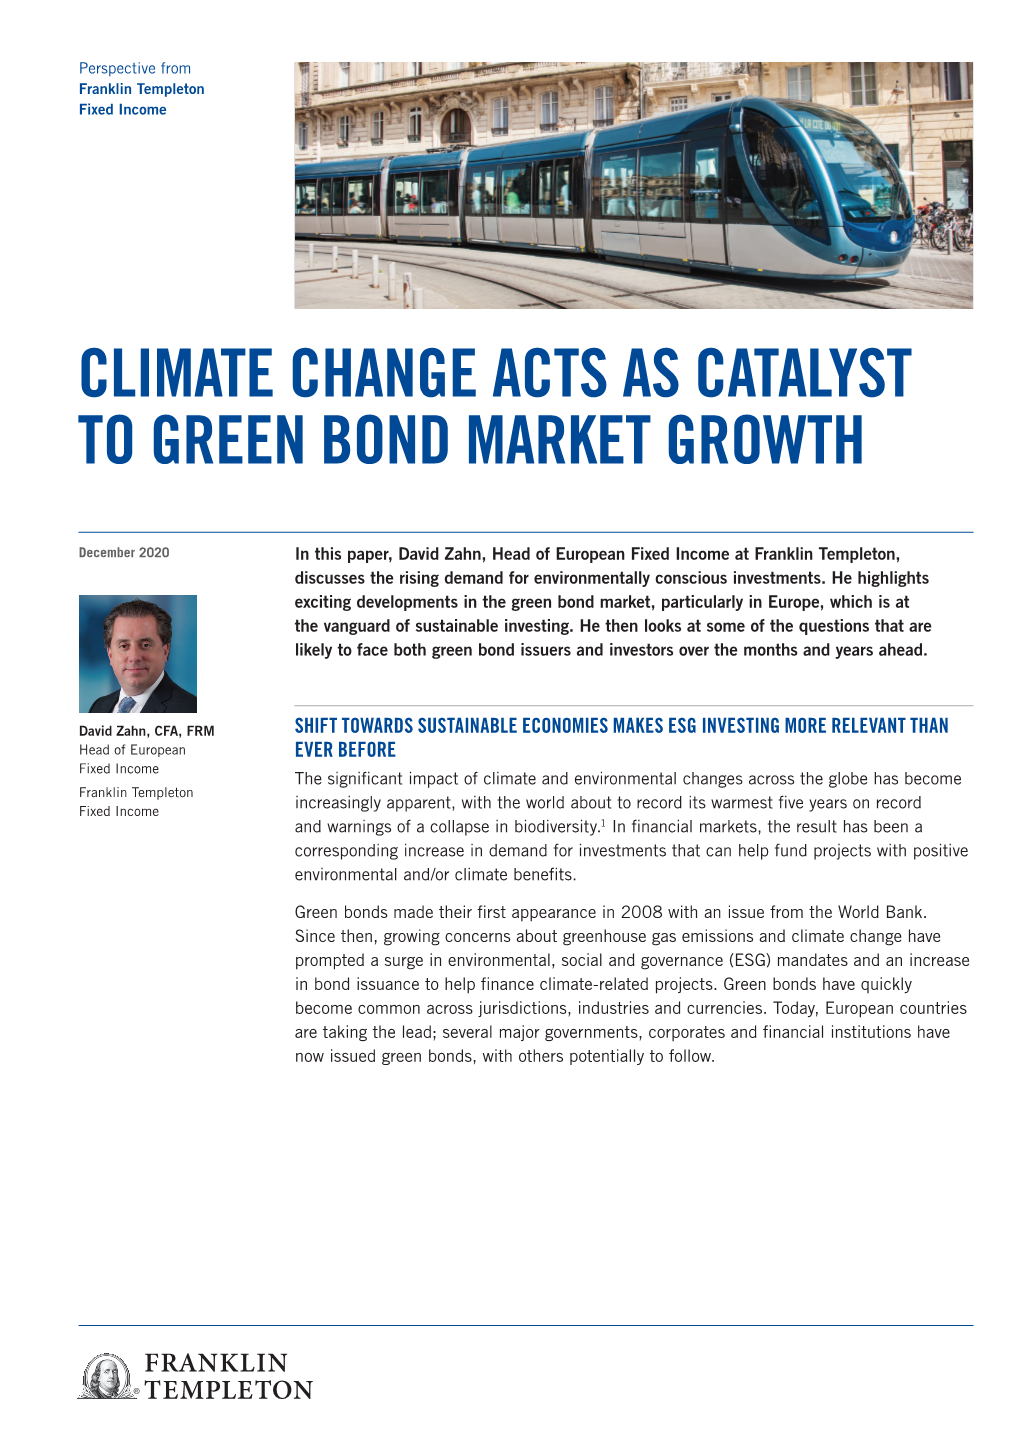 Climate Change Acts As Catalyst to Green Bond Market Growth